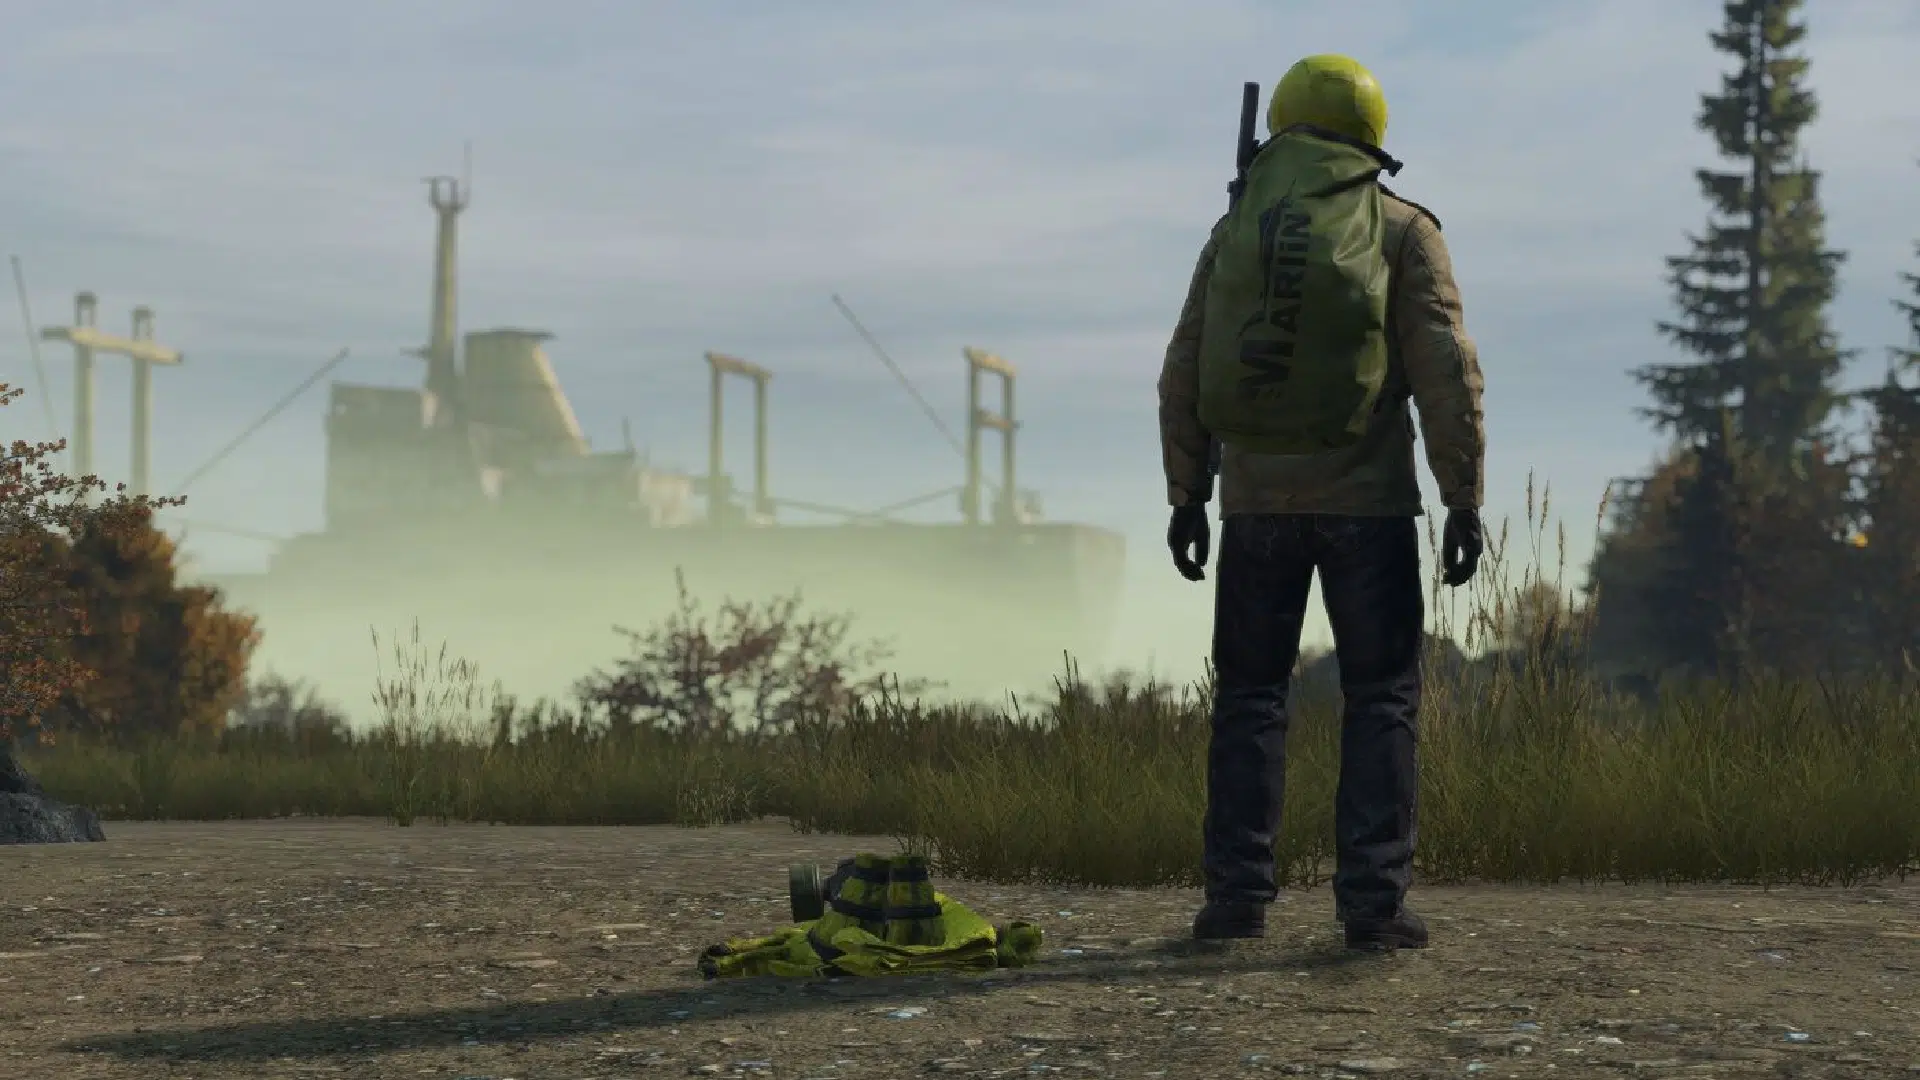 DayZ Down and Having Server Issues This July 11